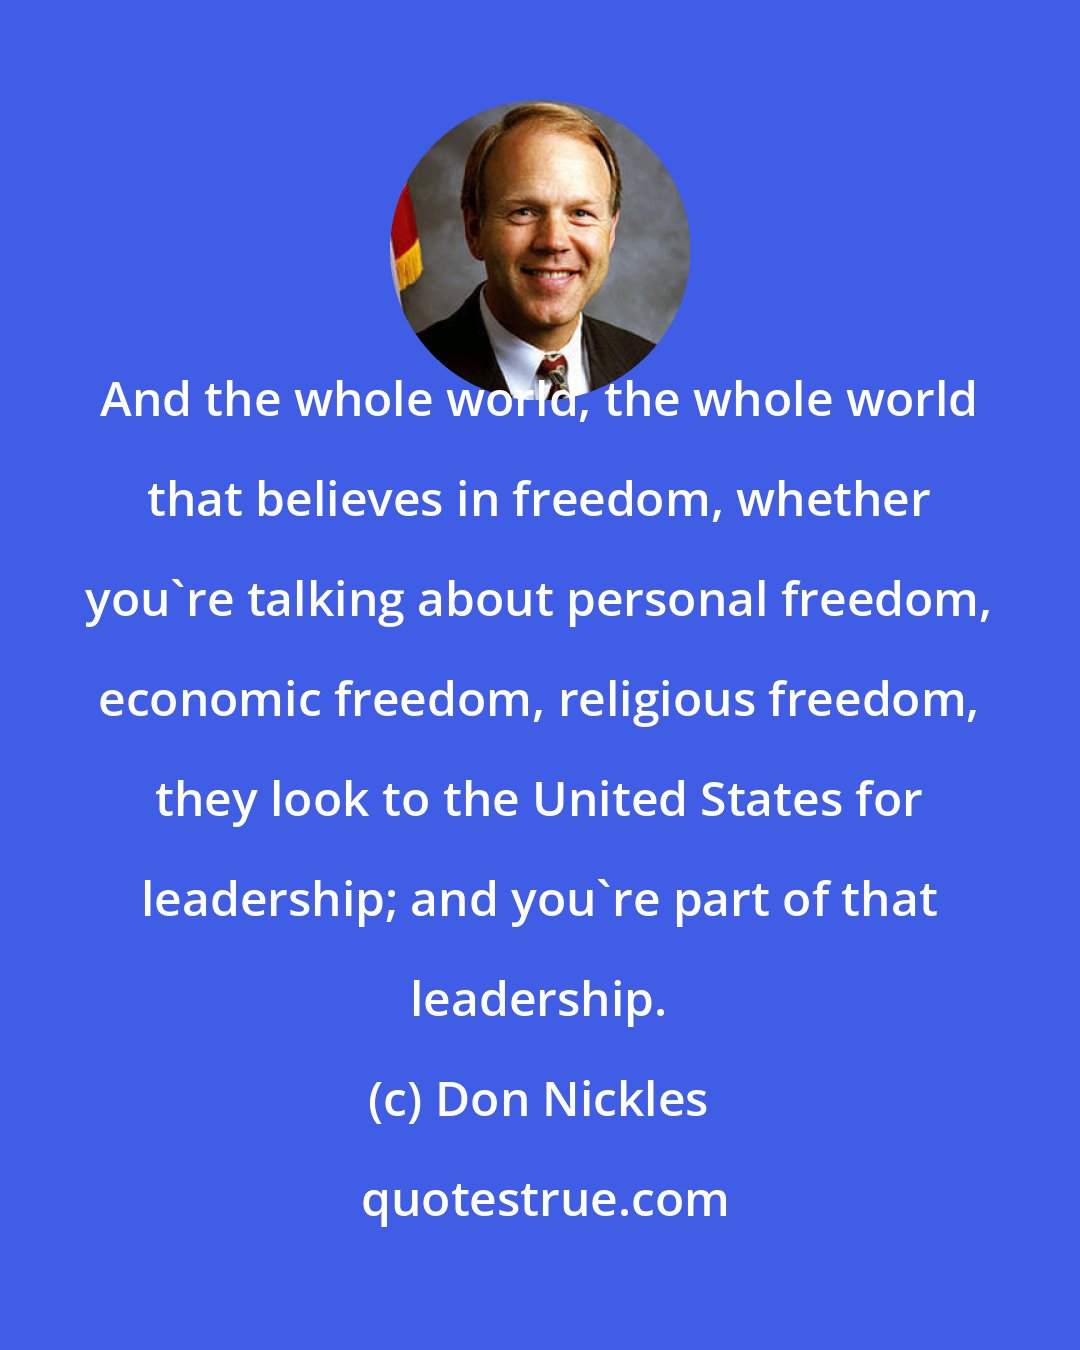 Don Nickles: And the whole world, the whole world that believes in freedom, whether you're talking about personal freedom, economic freedom, religious freedom, they look to the United States for leadership; and you're part of that leadership.